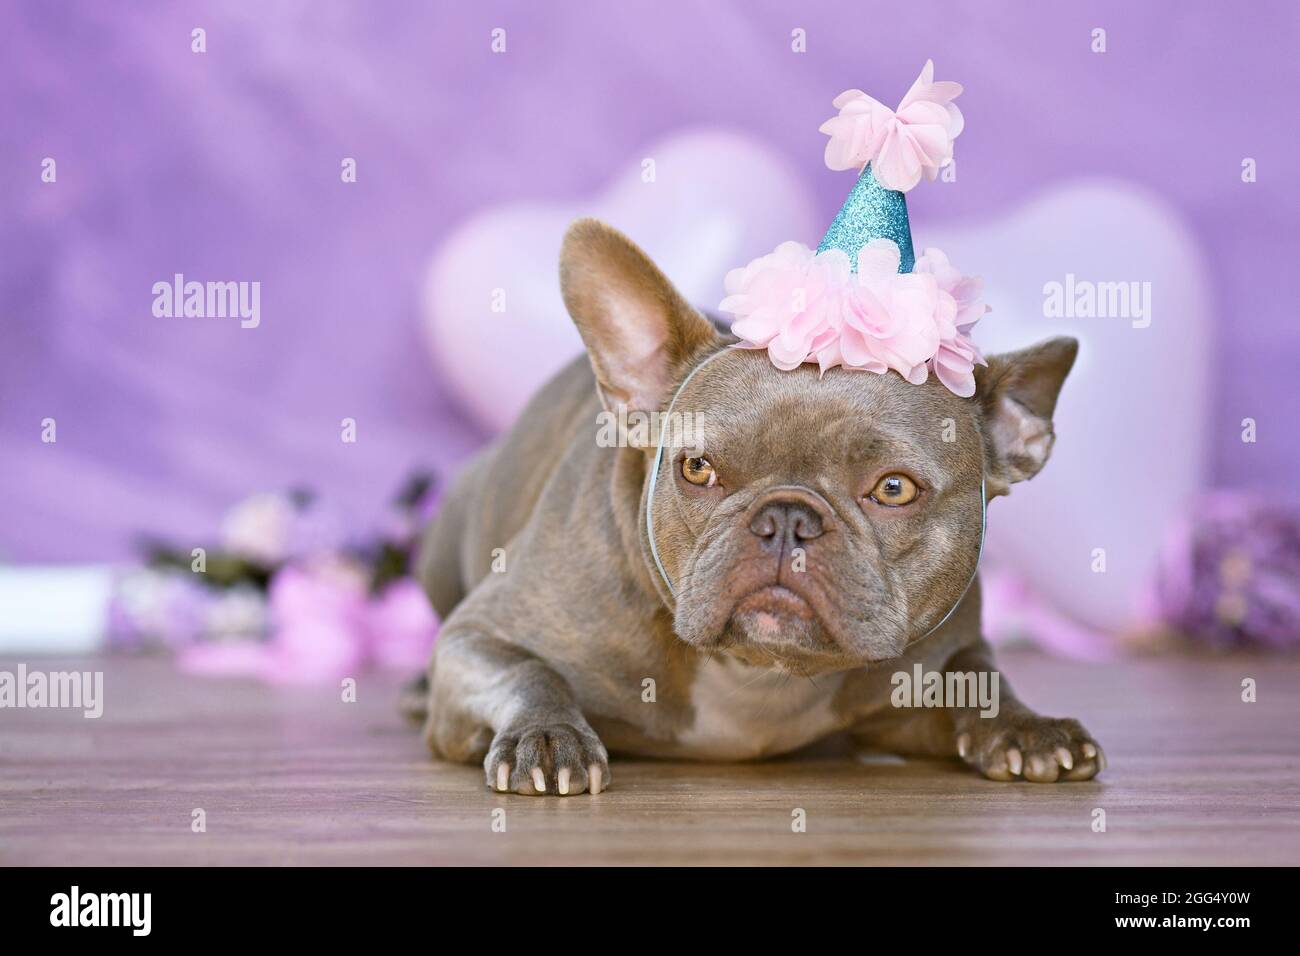 French Bulldog dog with birthday part hat in front of blurry pink background with flowers and heart shaped balloons Stock Photo